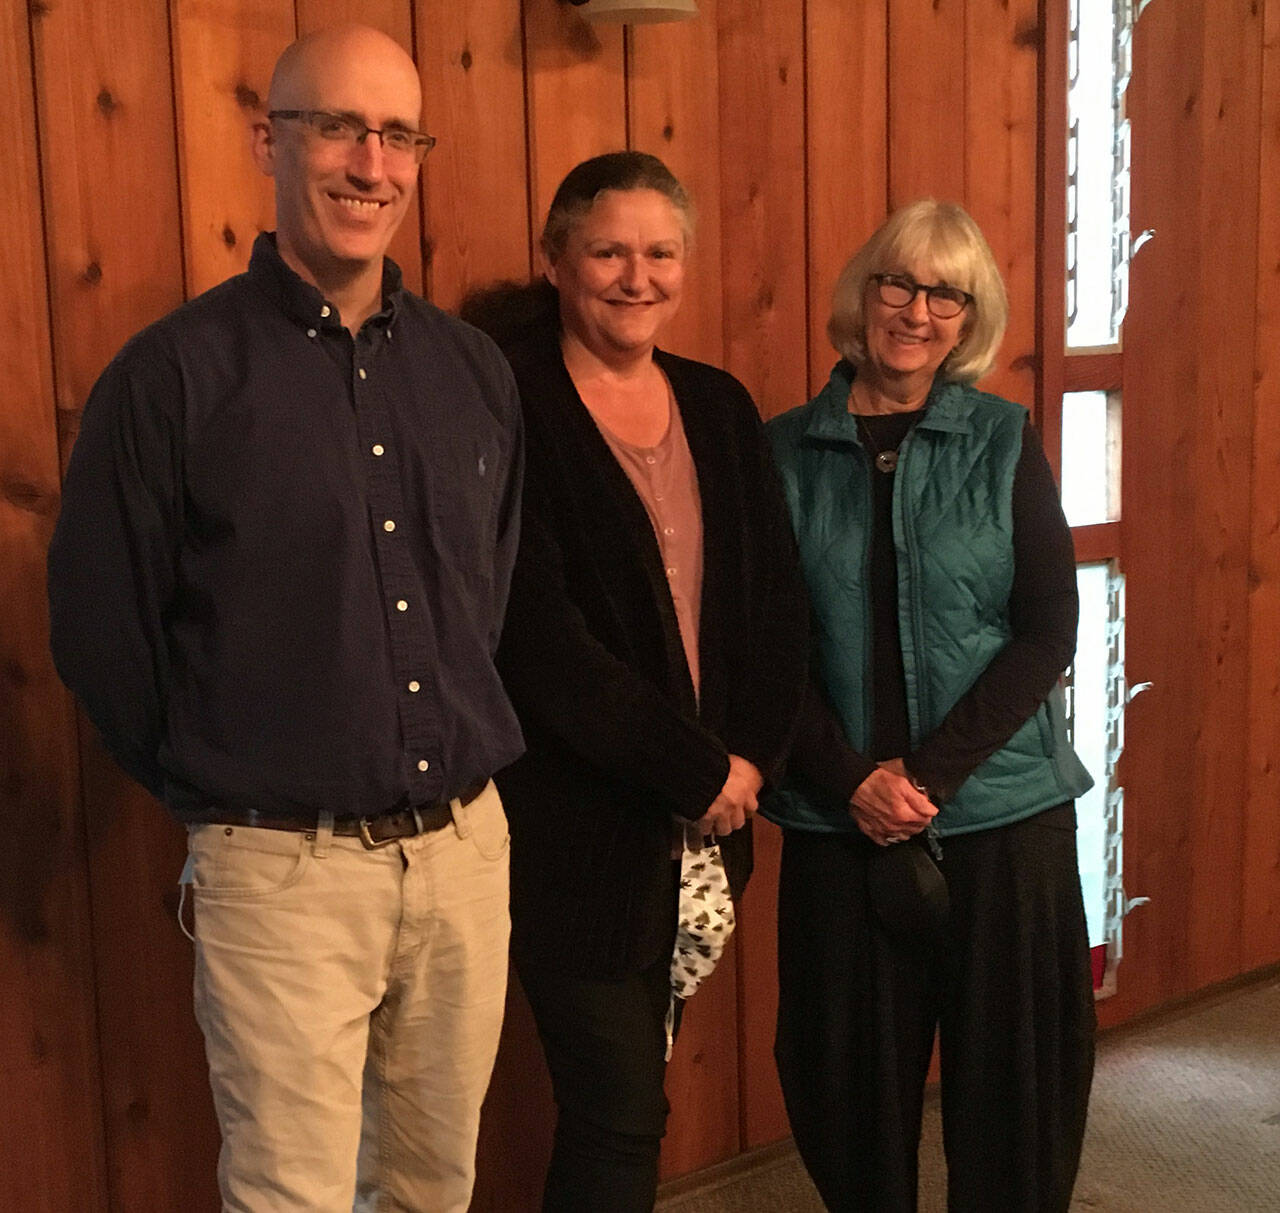 Elizabeth Shepherd Photo
Koshin Christopher Cain, Lisa Devereau and Diane Sweetman are all celebrating Puget Sound Zen Center’s purchase of the Island Funeral Services building and grounds.